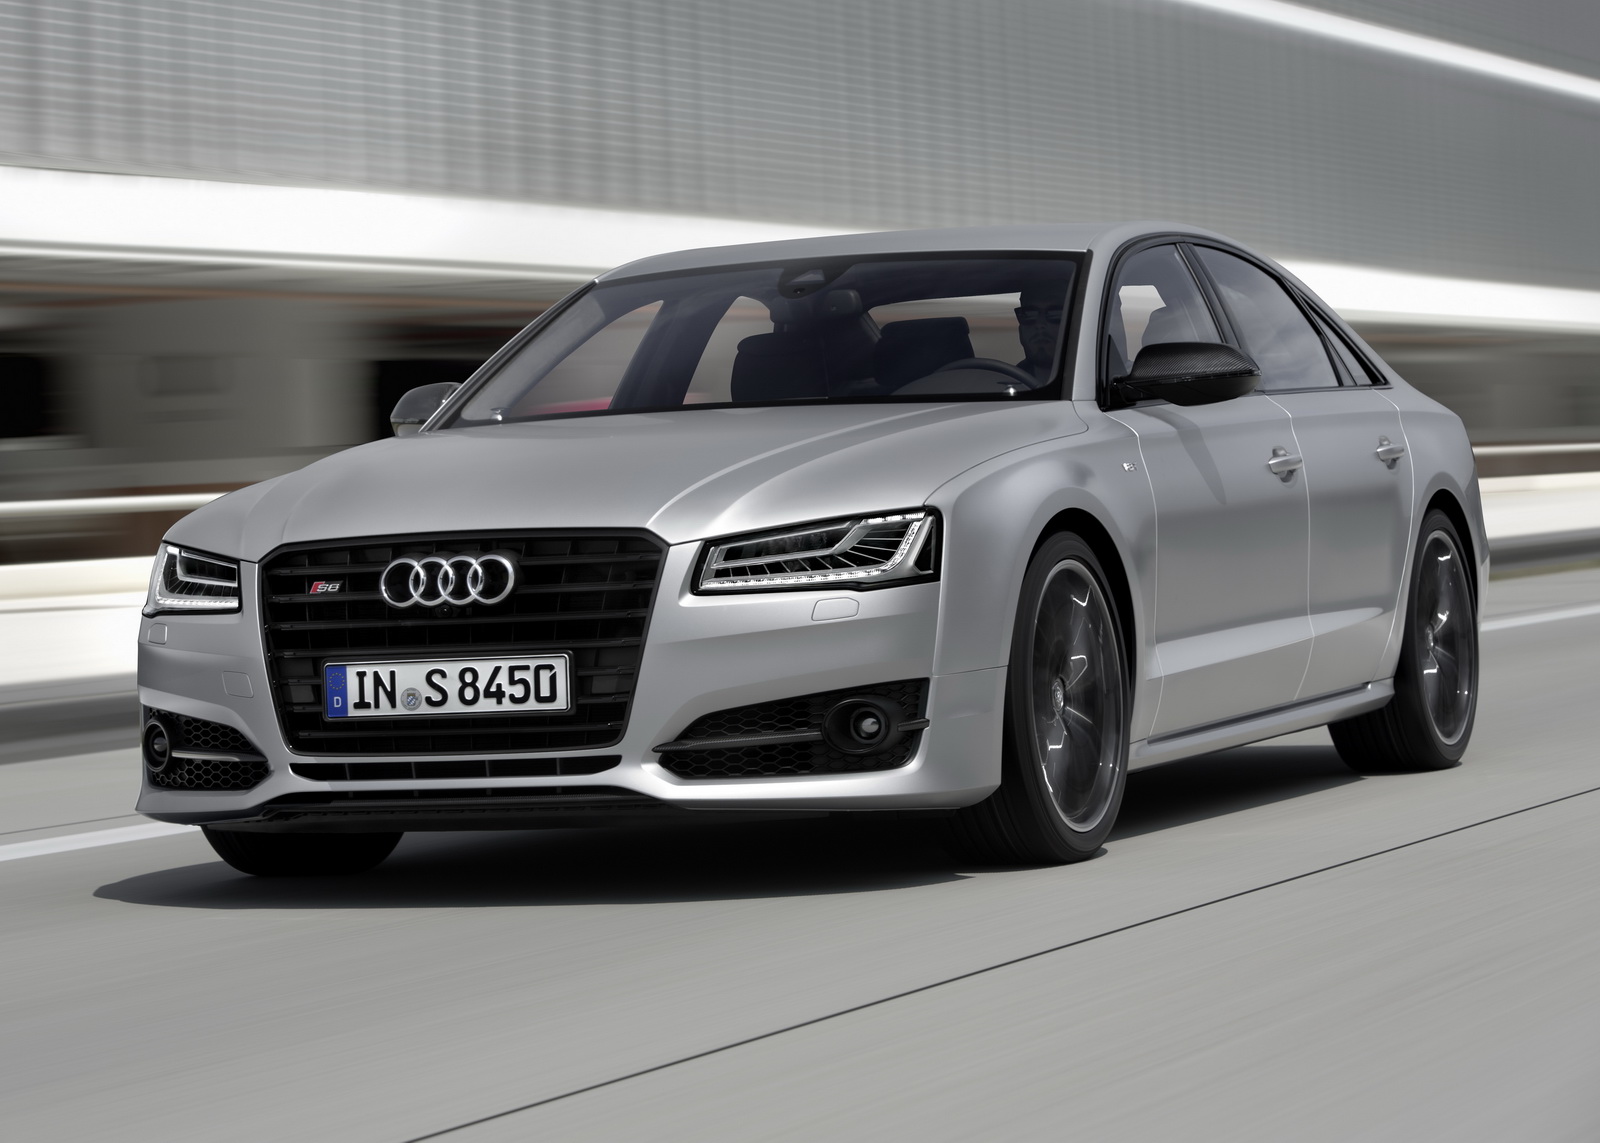 Audi S8 Plus 0 62 Time Specs Prices And Sale Date Evo